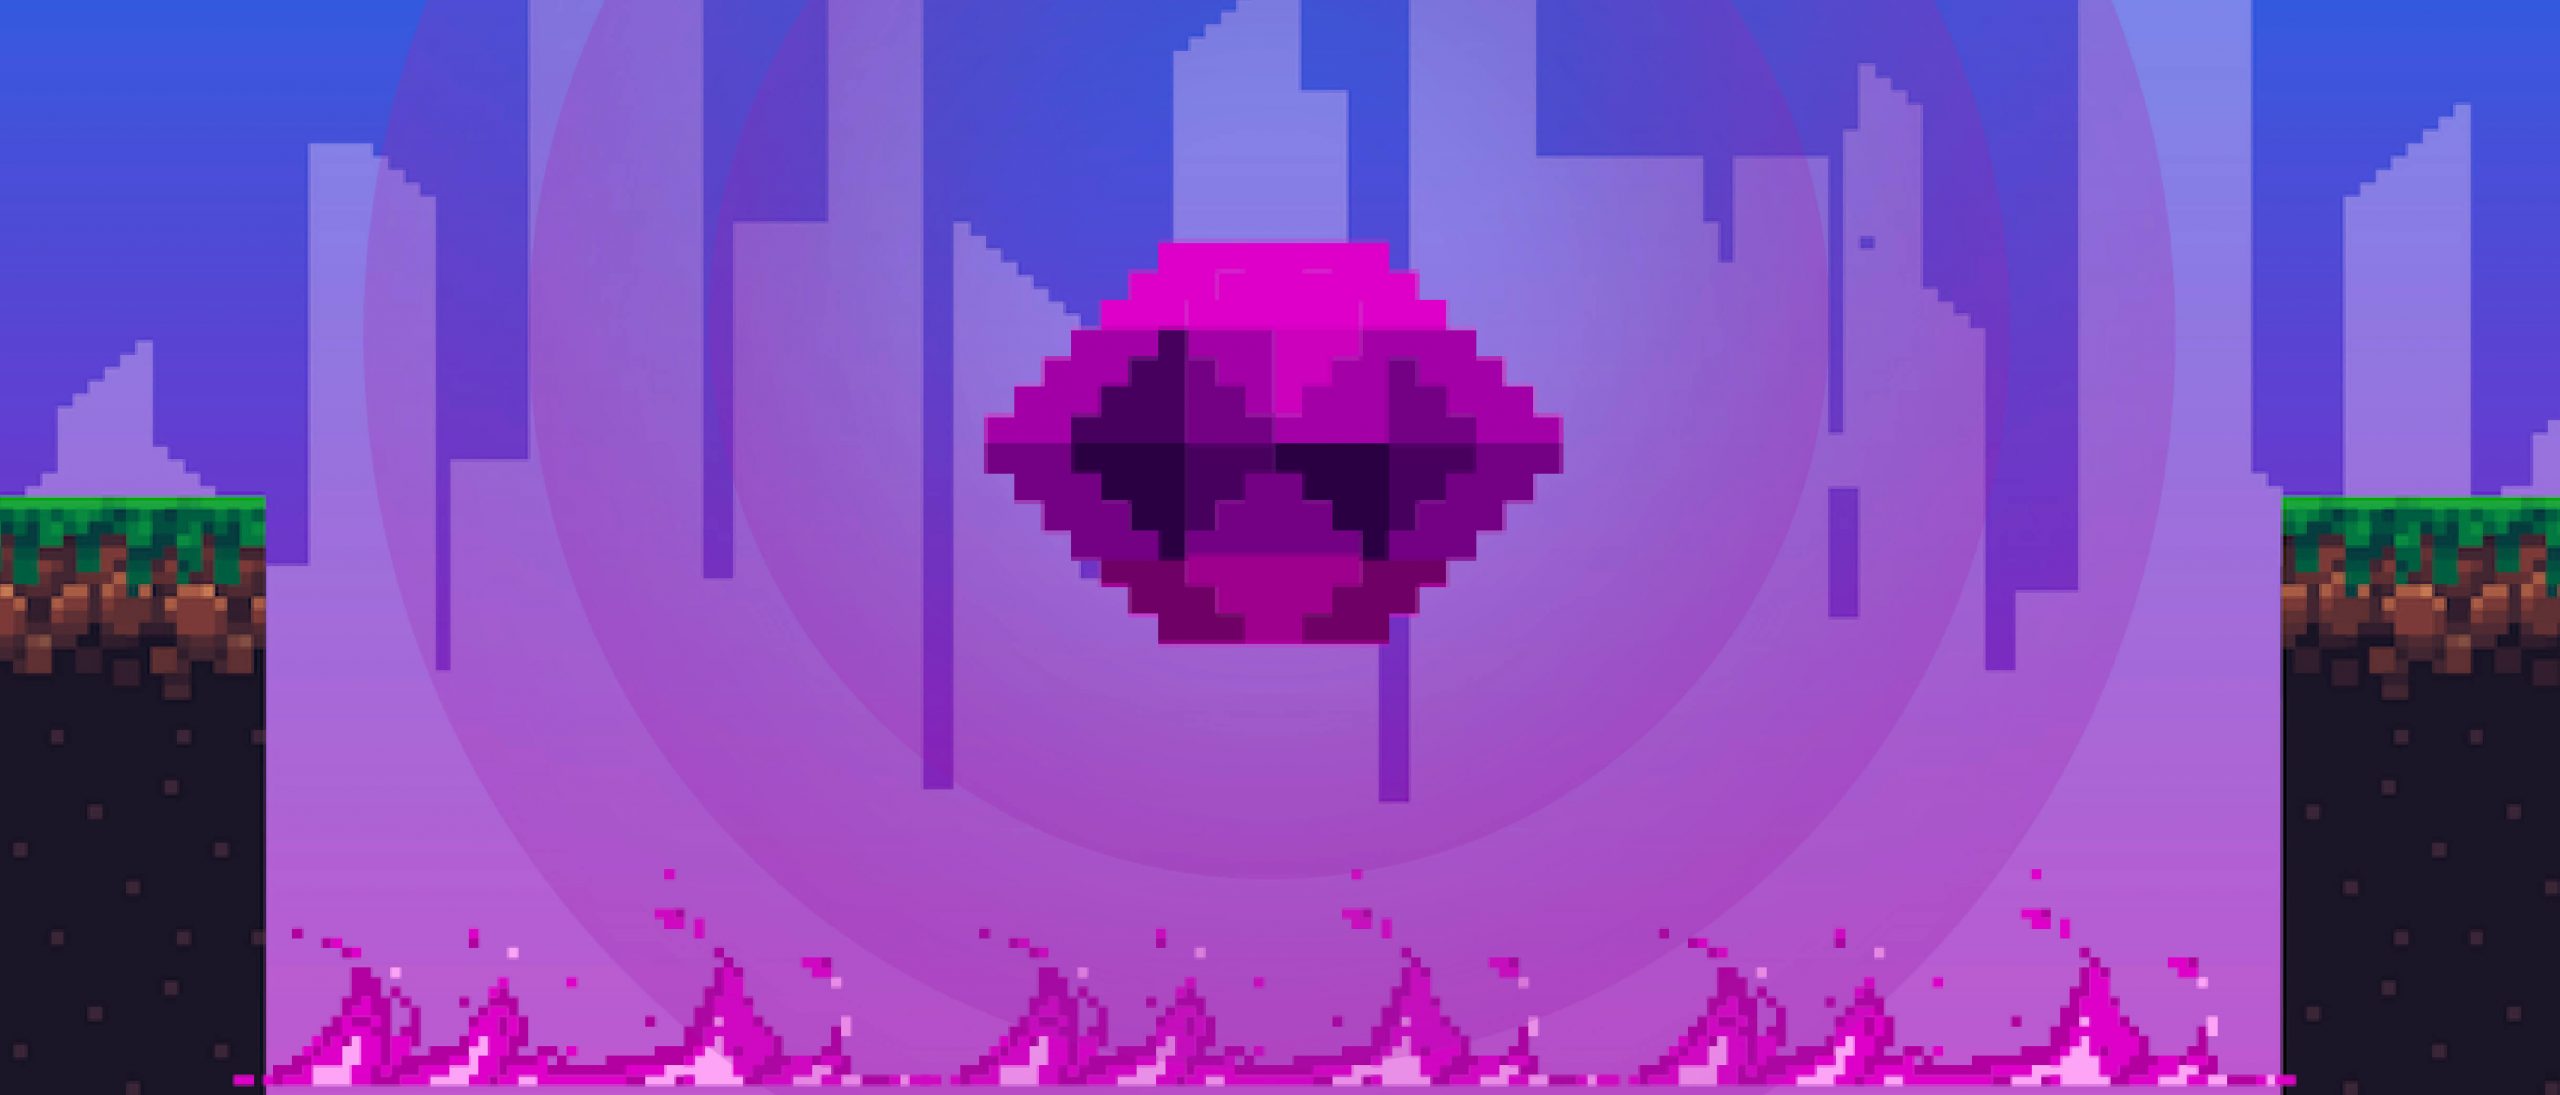 8-bit image of a purple rock hovering over a pit..